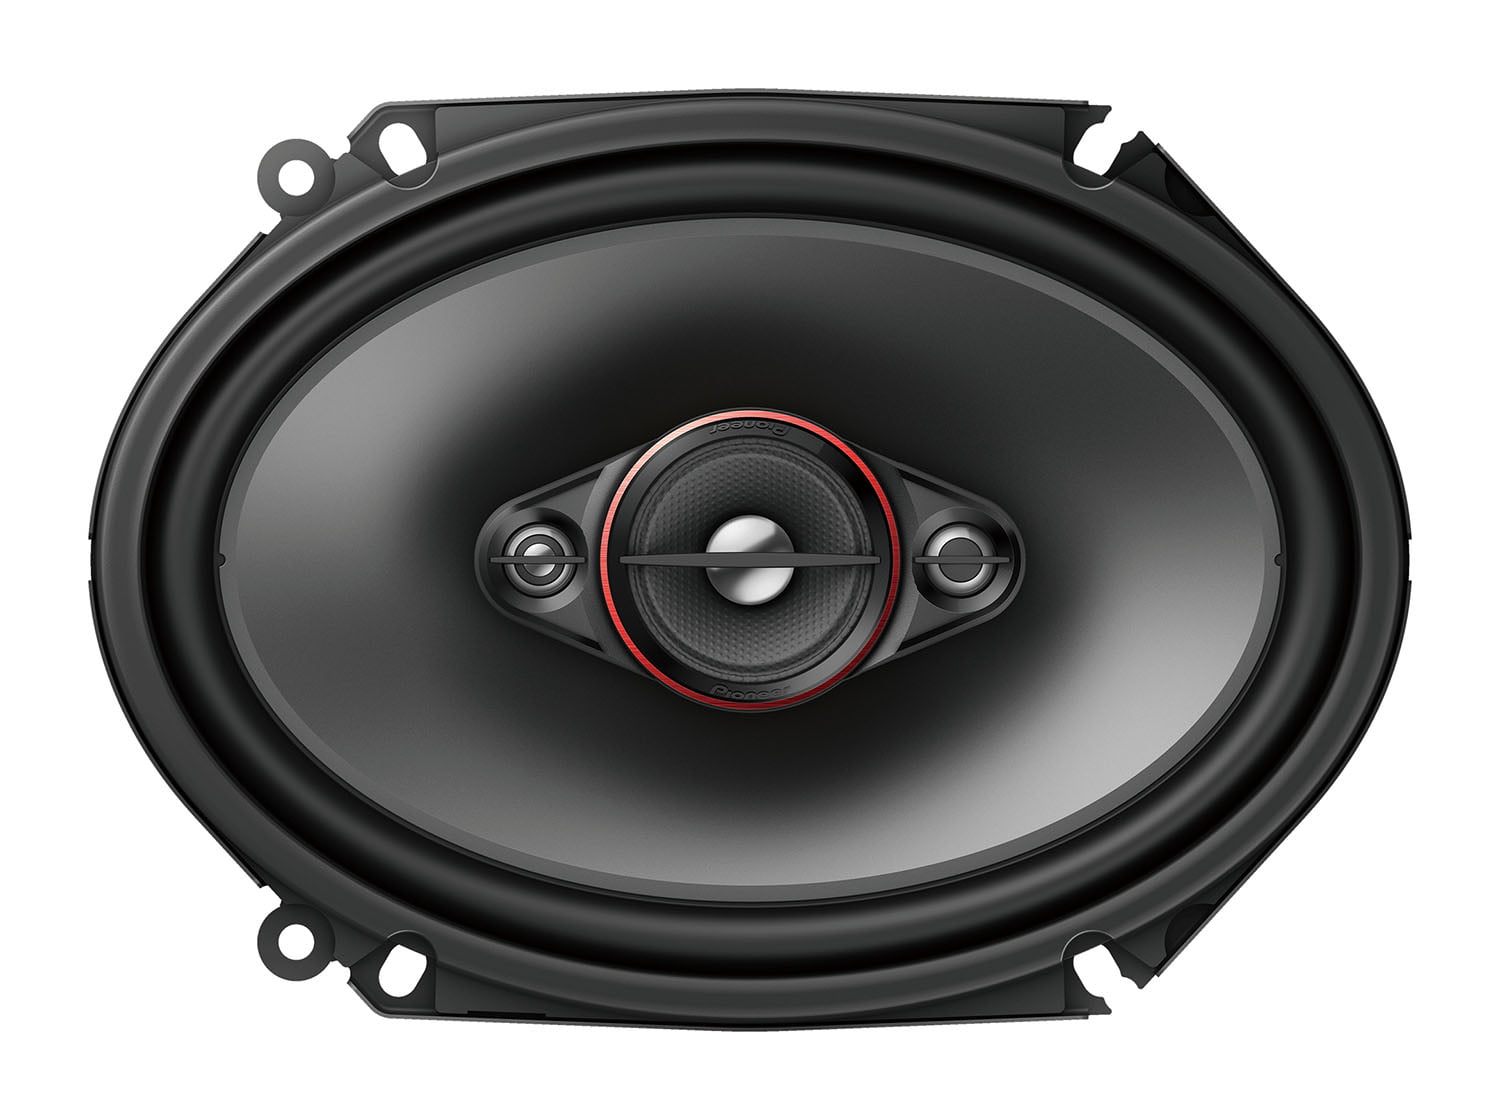 way coaxial speakers, 350W max power 